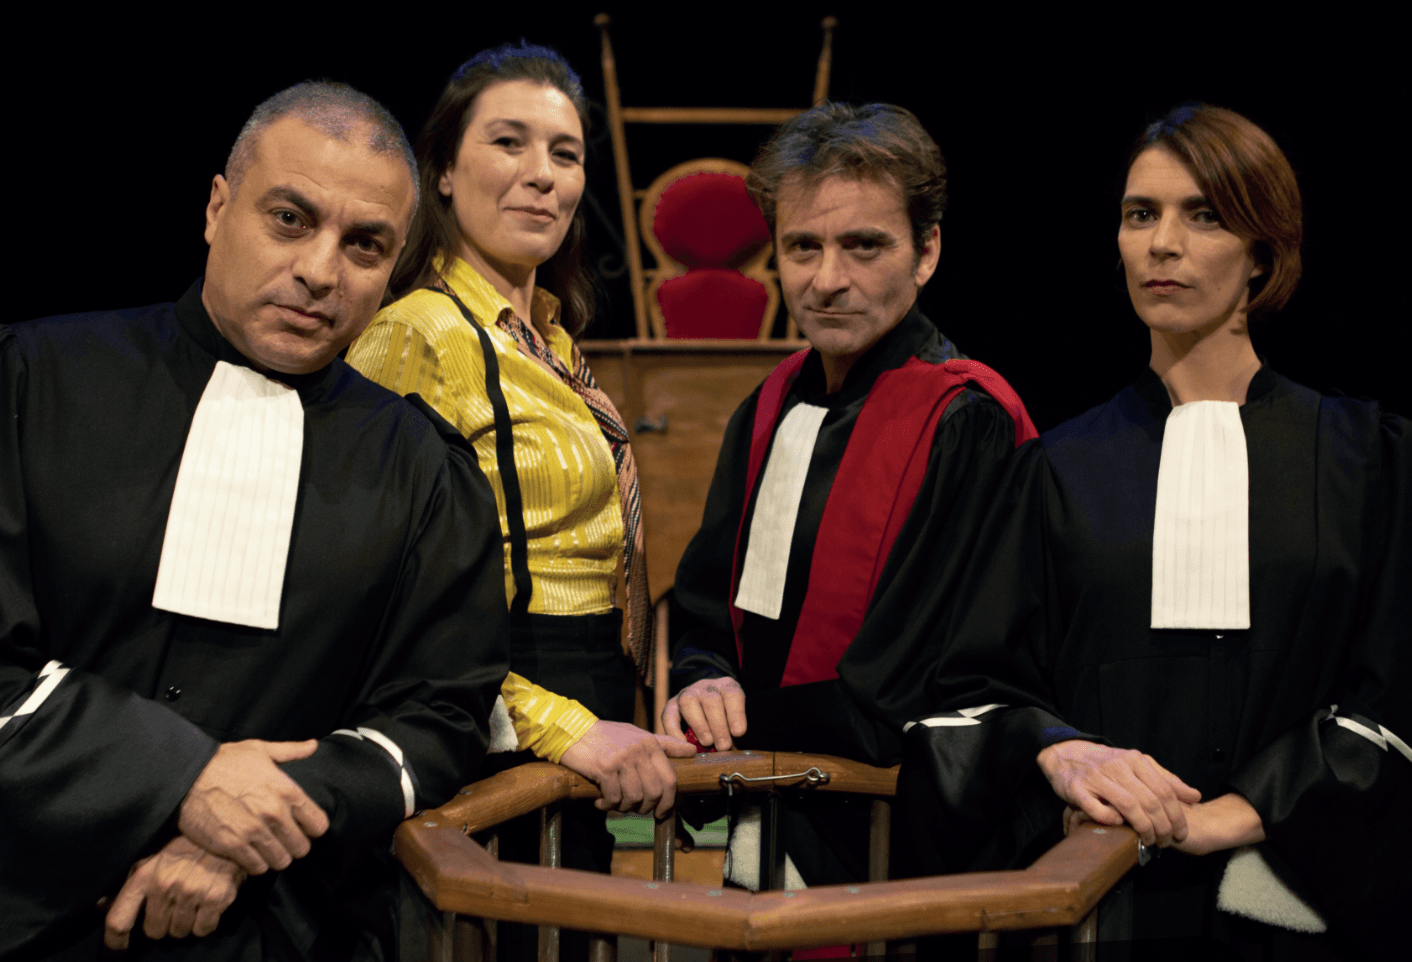 Four people dressed in court robes looking into the camera